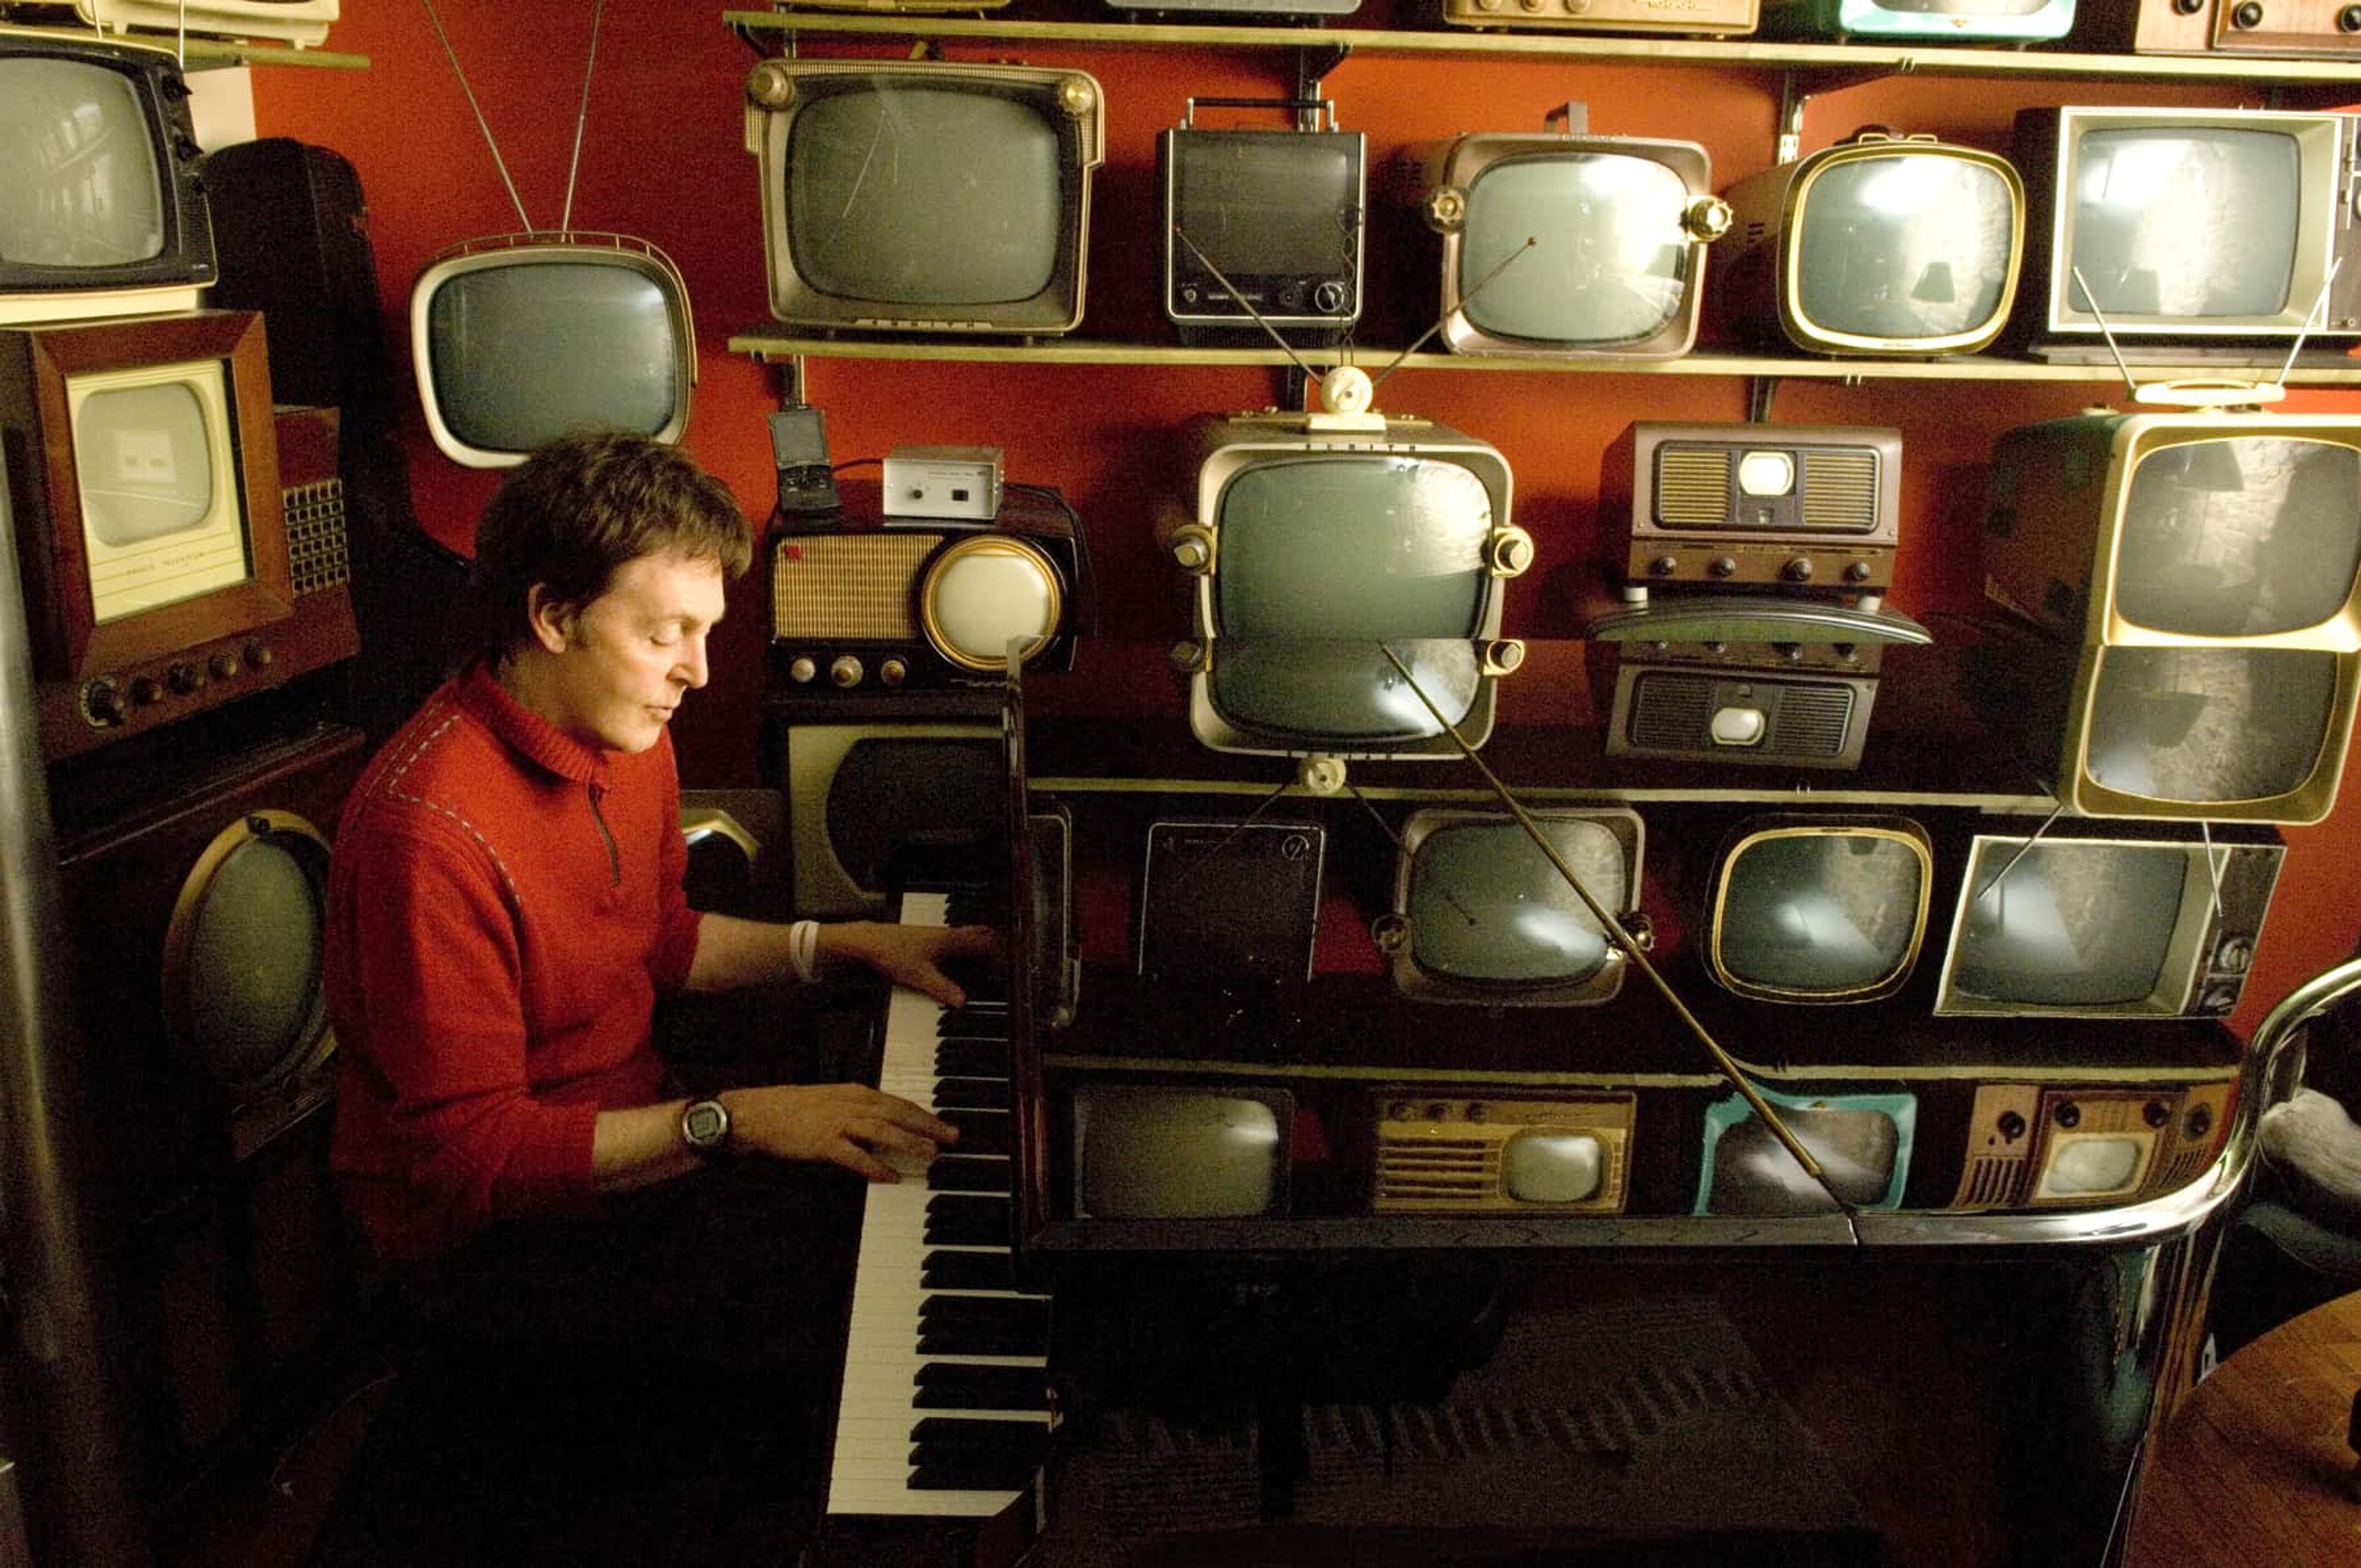 Paul sat at a piano with lots of old TVs on the wall behind him